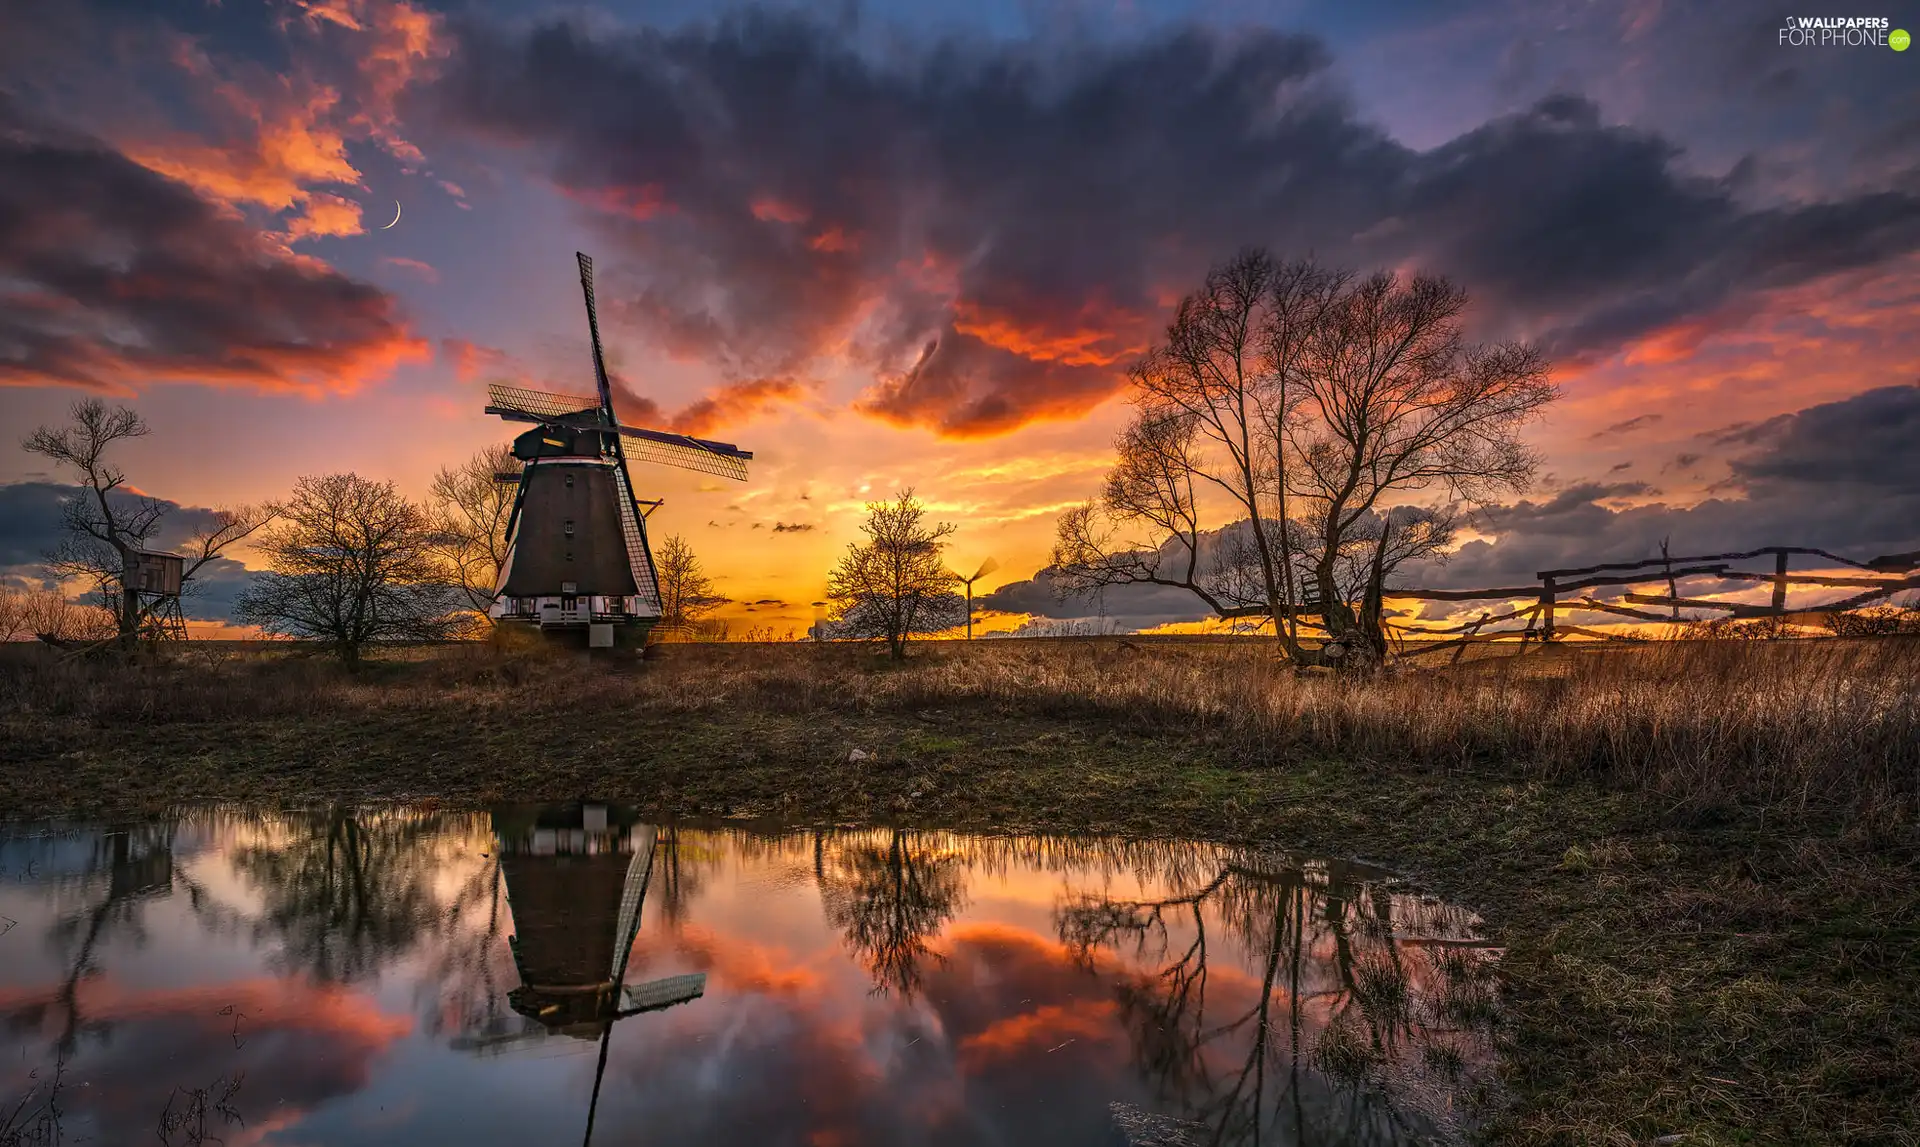 Pond - car, trees, photomontage, viewes, reflection, clouds, Great Sunsets, Windmill